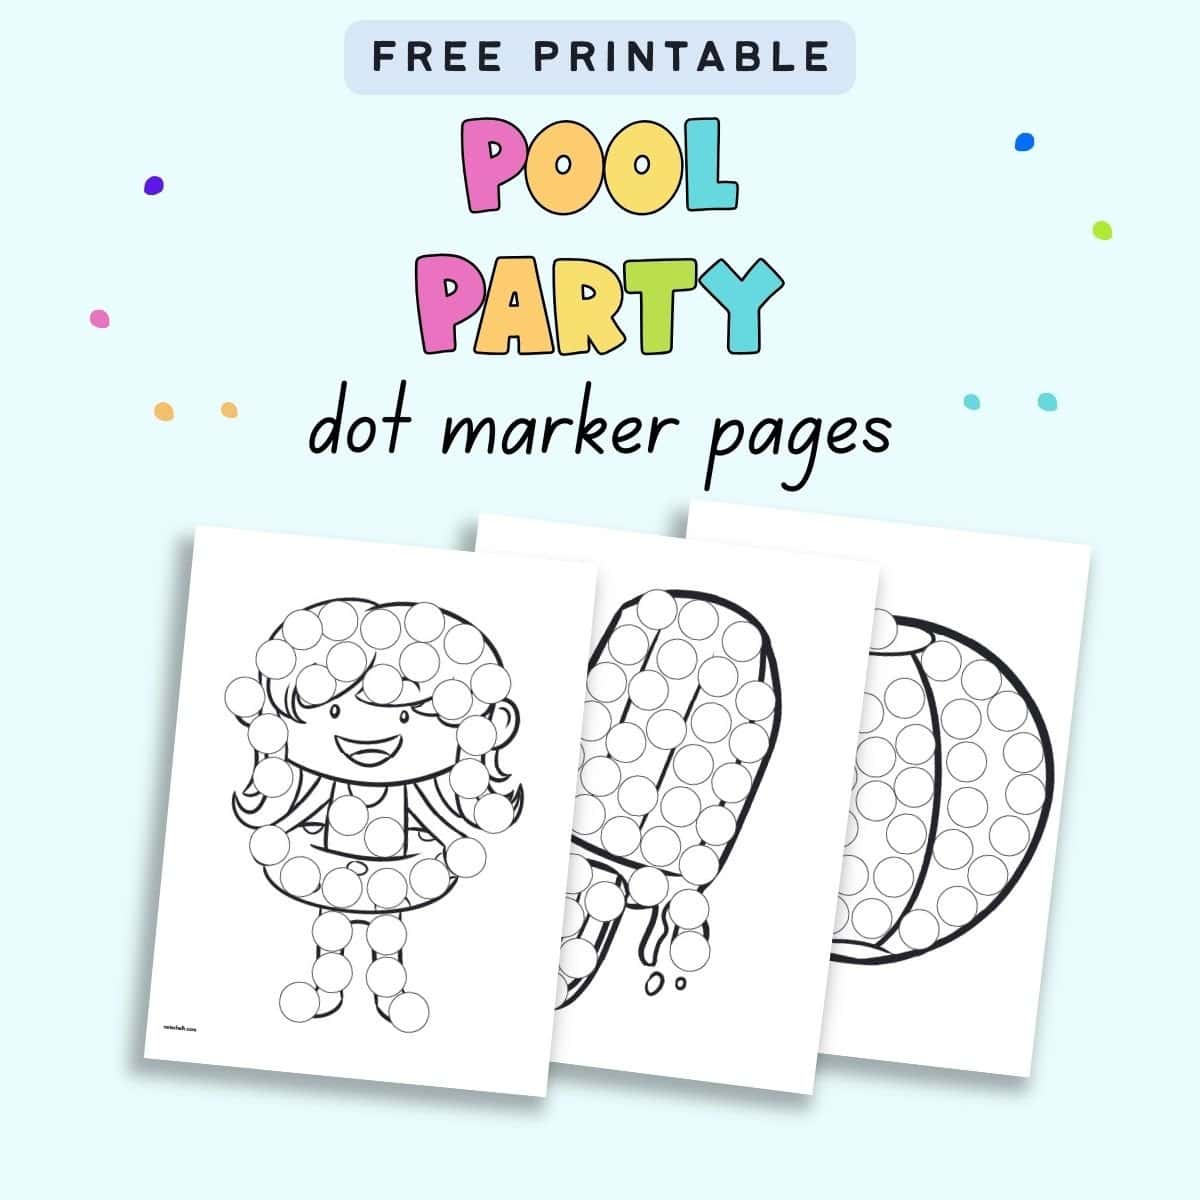 Text "free printable pool party dot marker pages" with a preview of three pool themed dauber marker coloring pages.